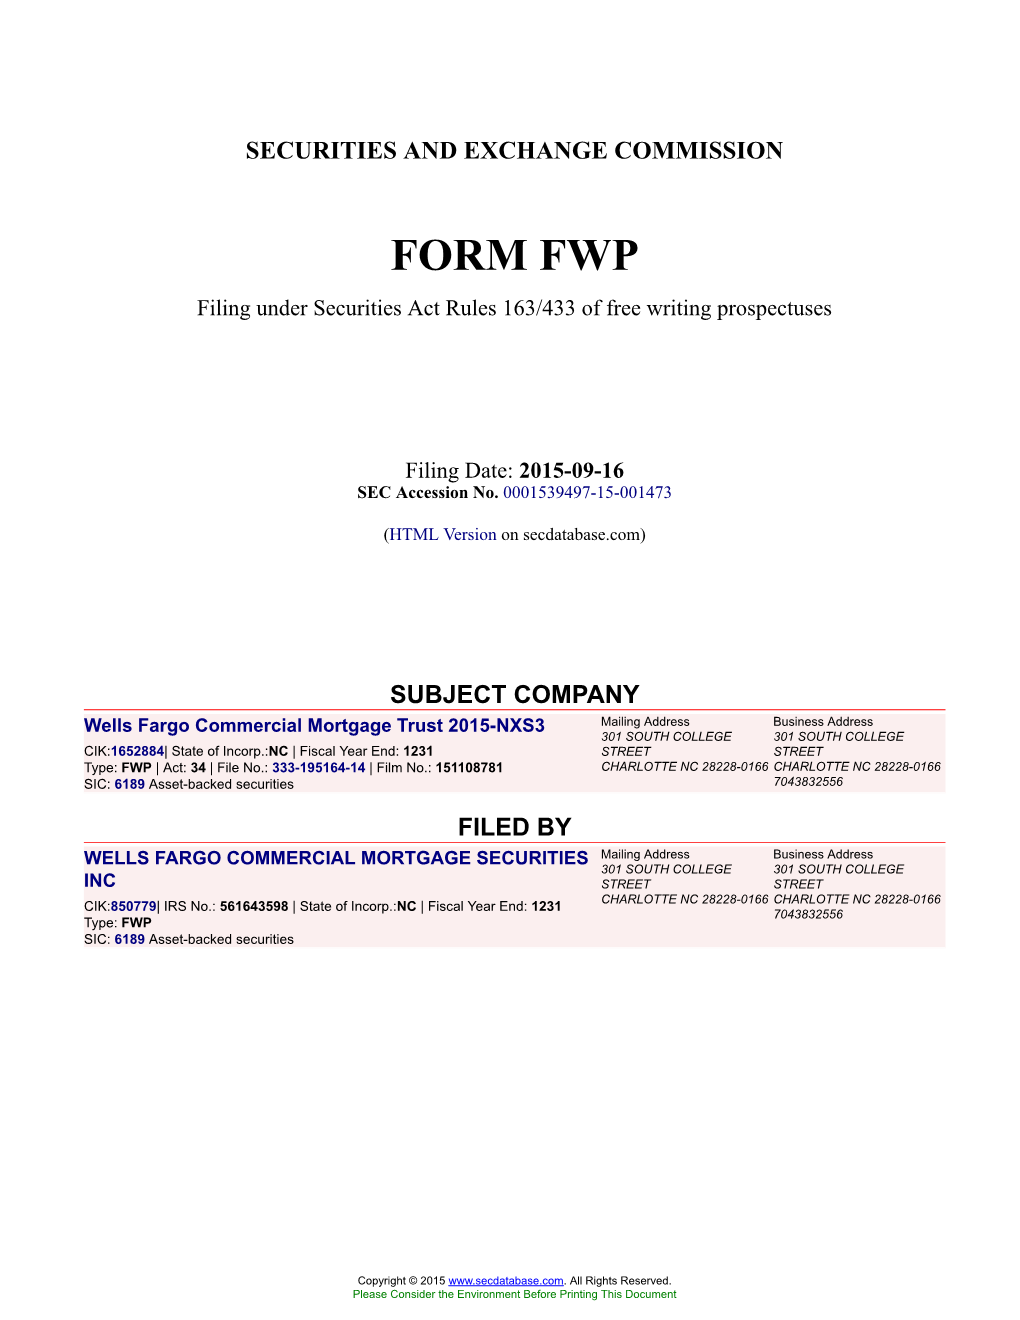 Wells Fargo Commercial Mortgage Trust 2015-NXS3 Form FWP Filed